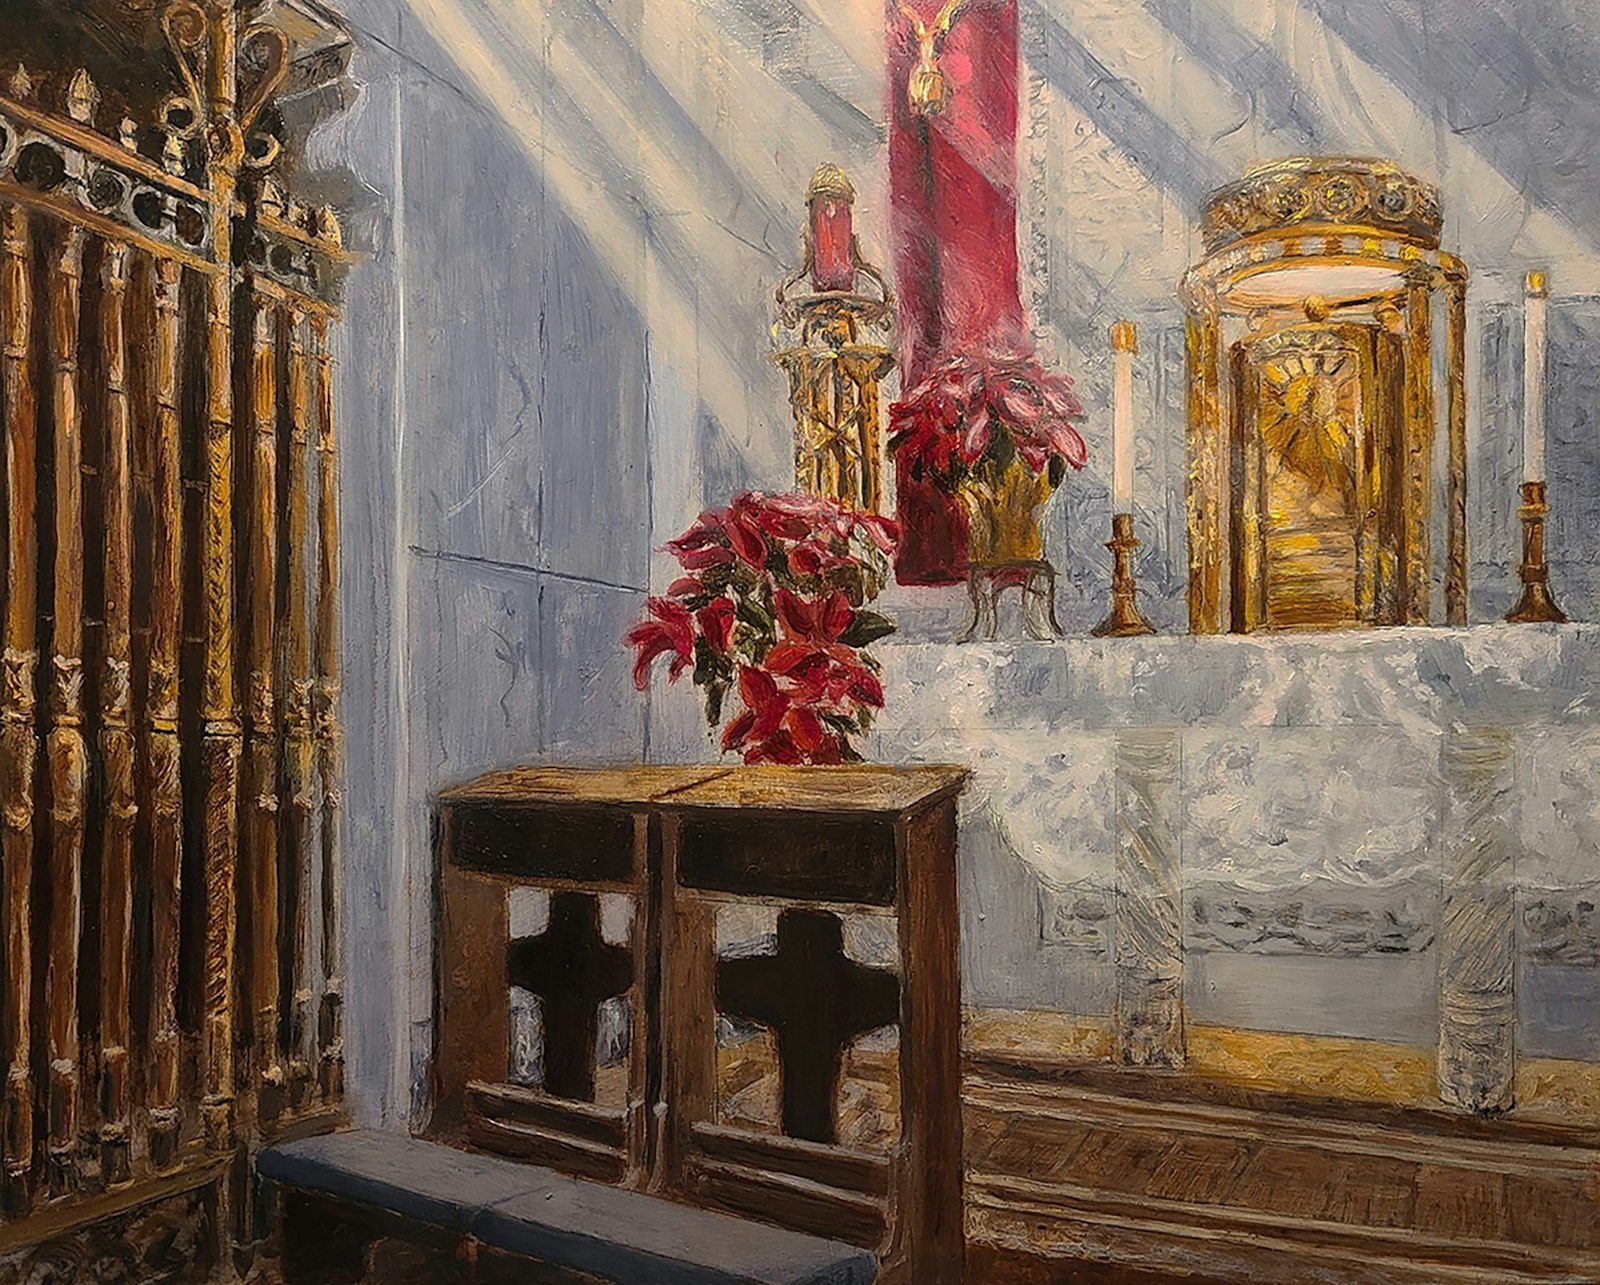 A side chapel in the National Shrine of the Little Flower Basilica in Royal Oak, painted by Mary Zabawski, was entered for consideration into an art show for the National Eucharistic Congress.